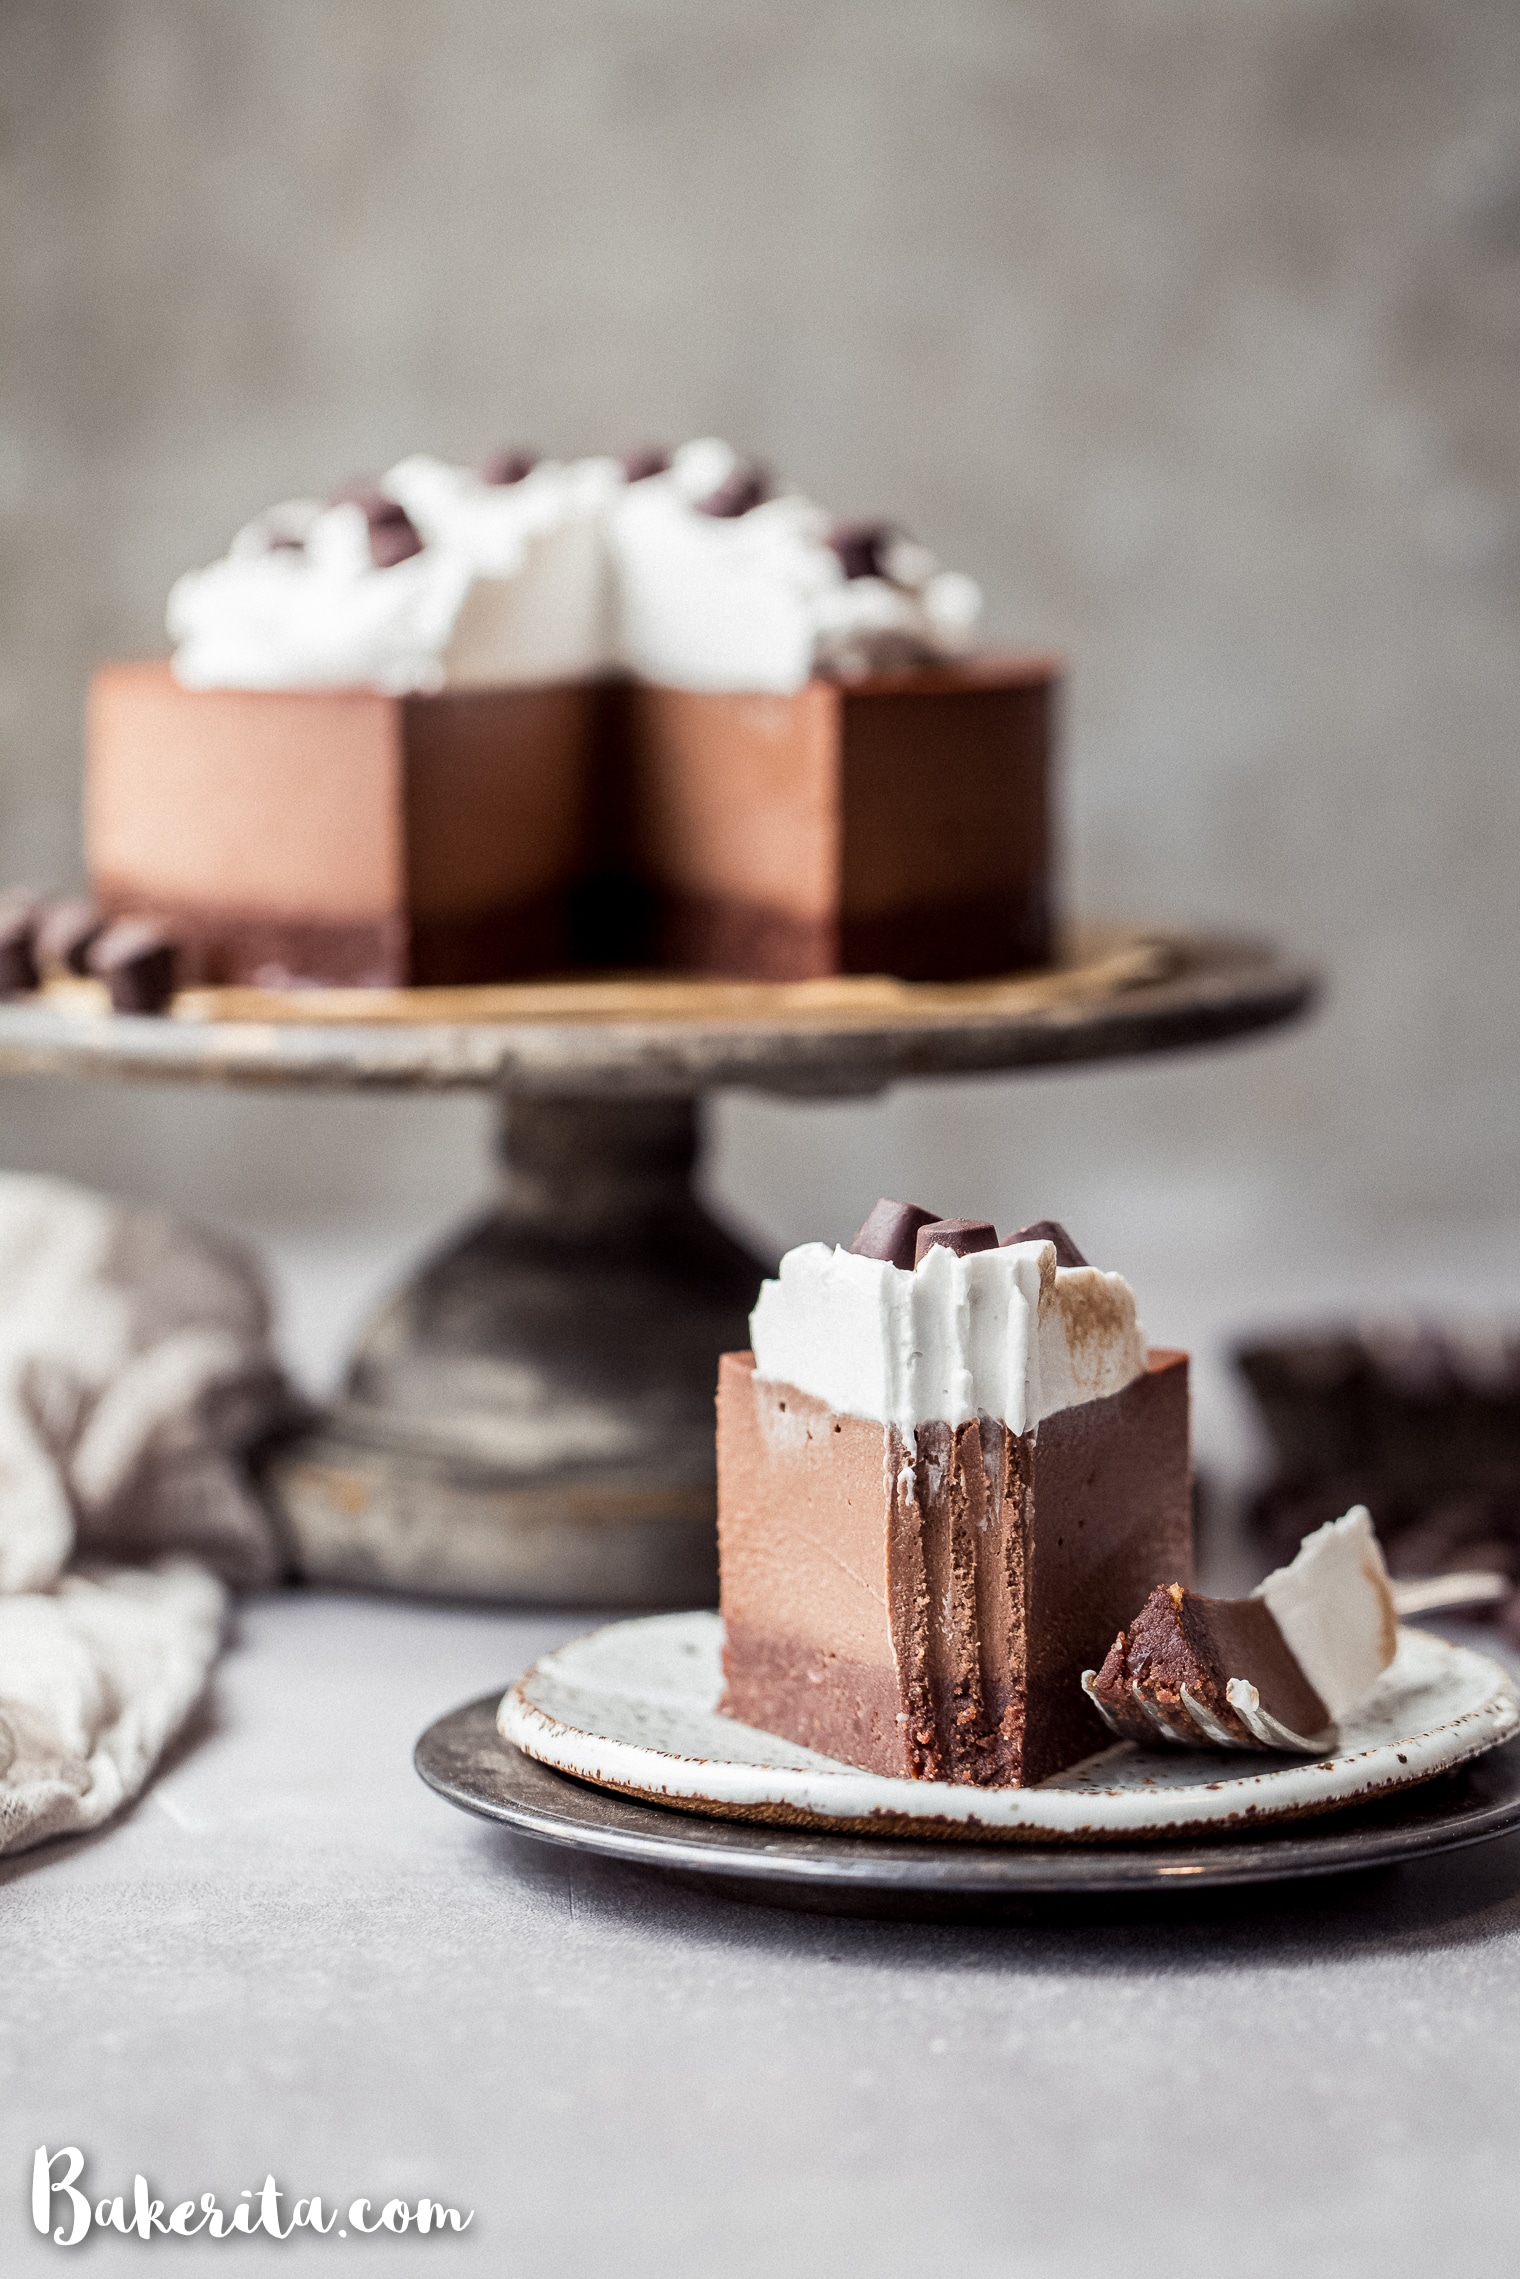 With a raw cakey chocolate crust and a decadently creamy chocolate filling, this gluten-free and vegan Chocolate Cream Pie will make you swoon! No baking necessary.